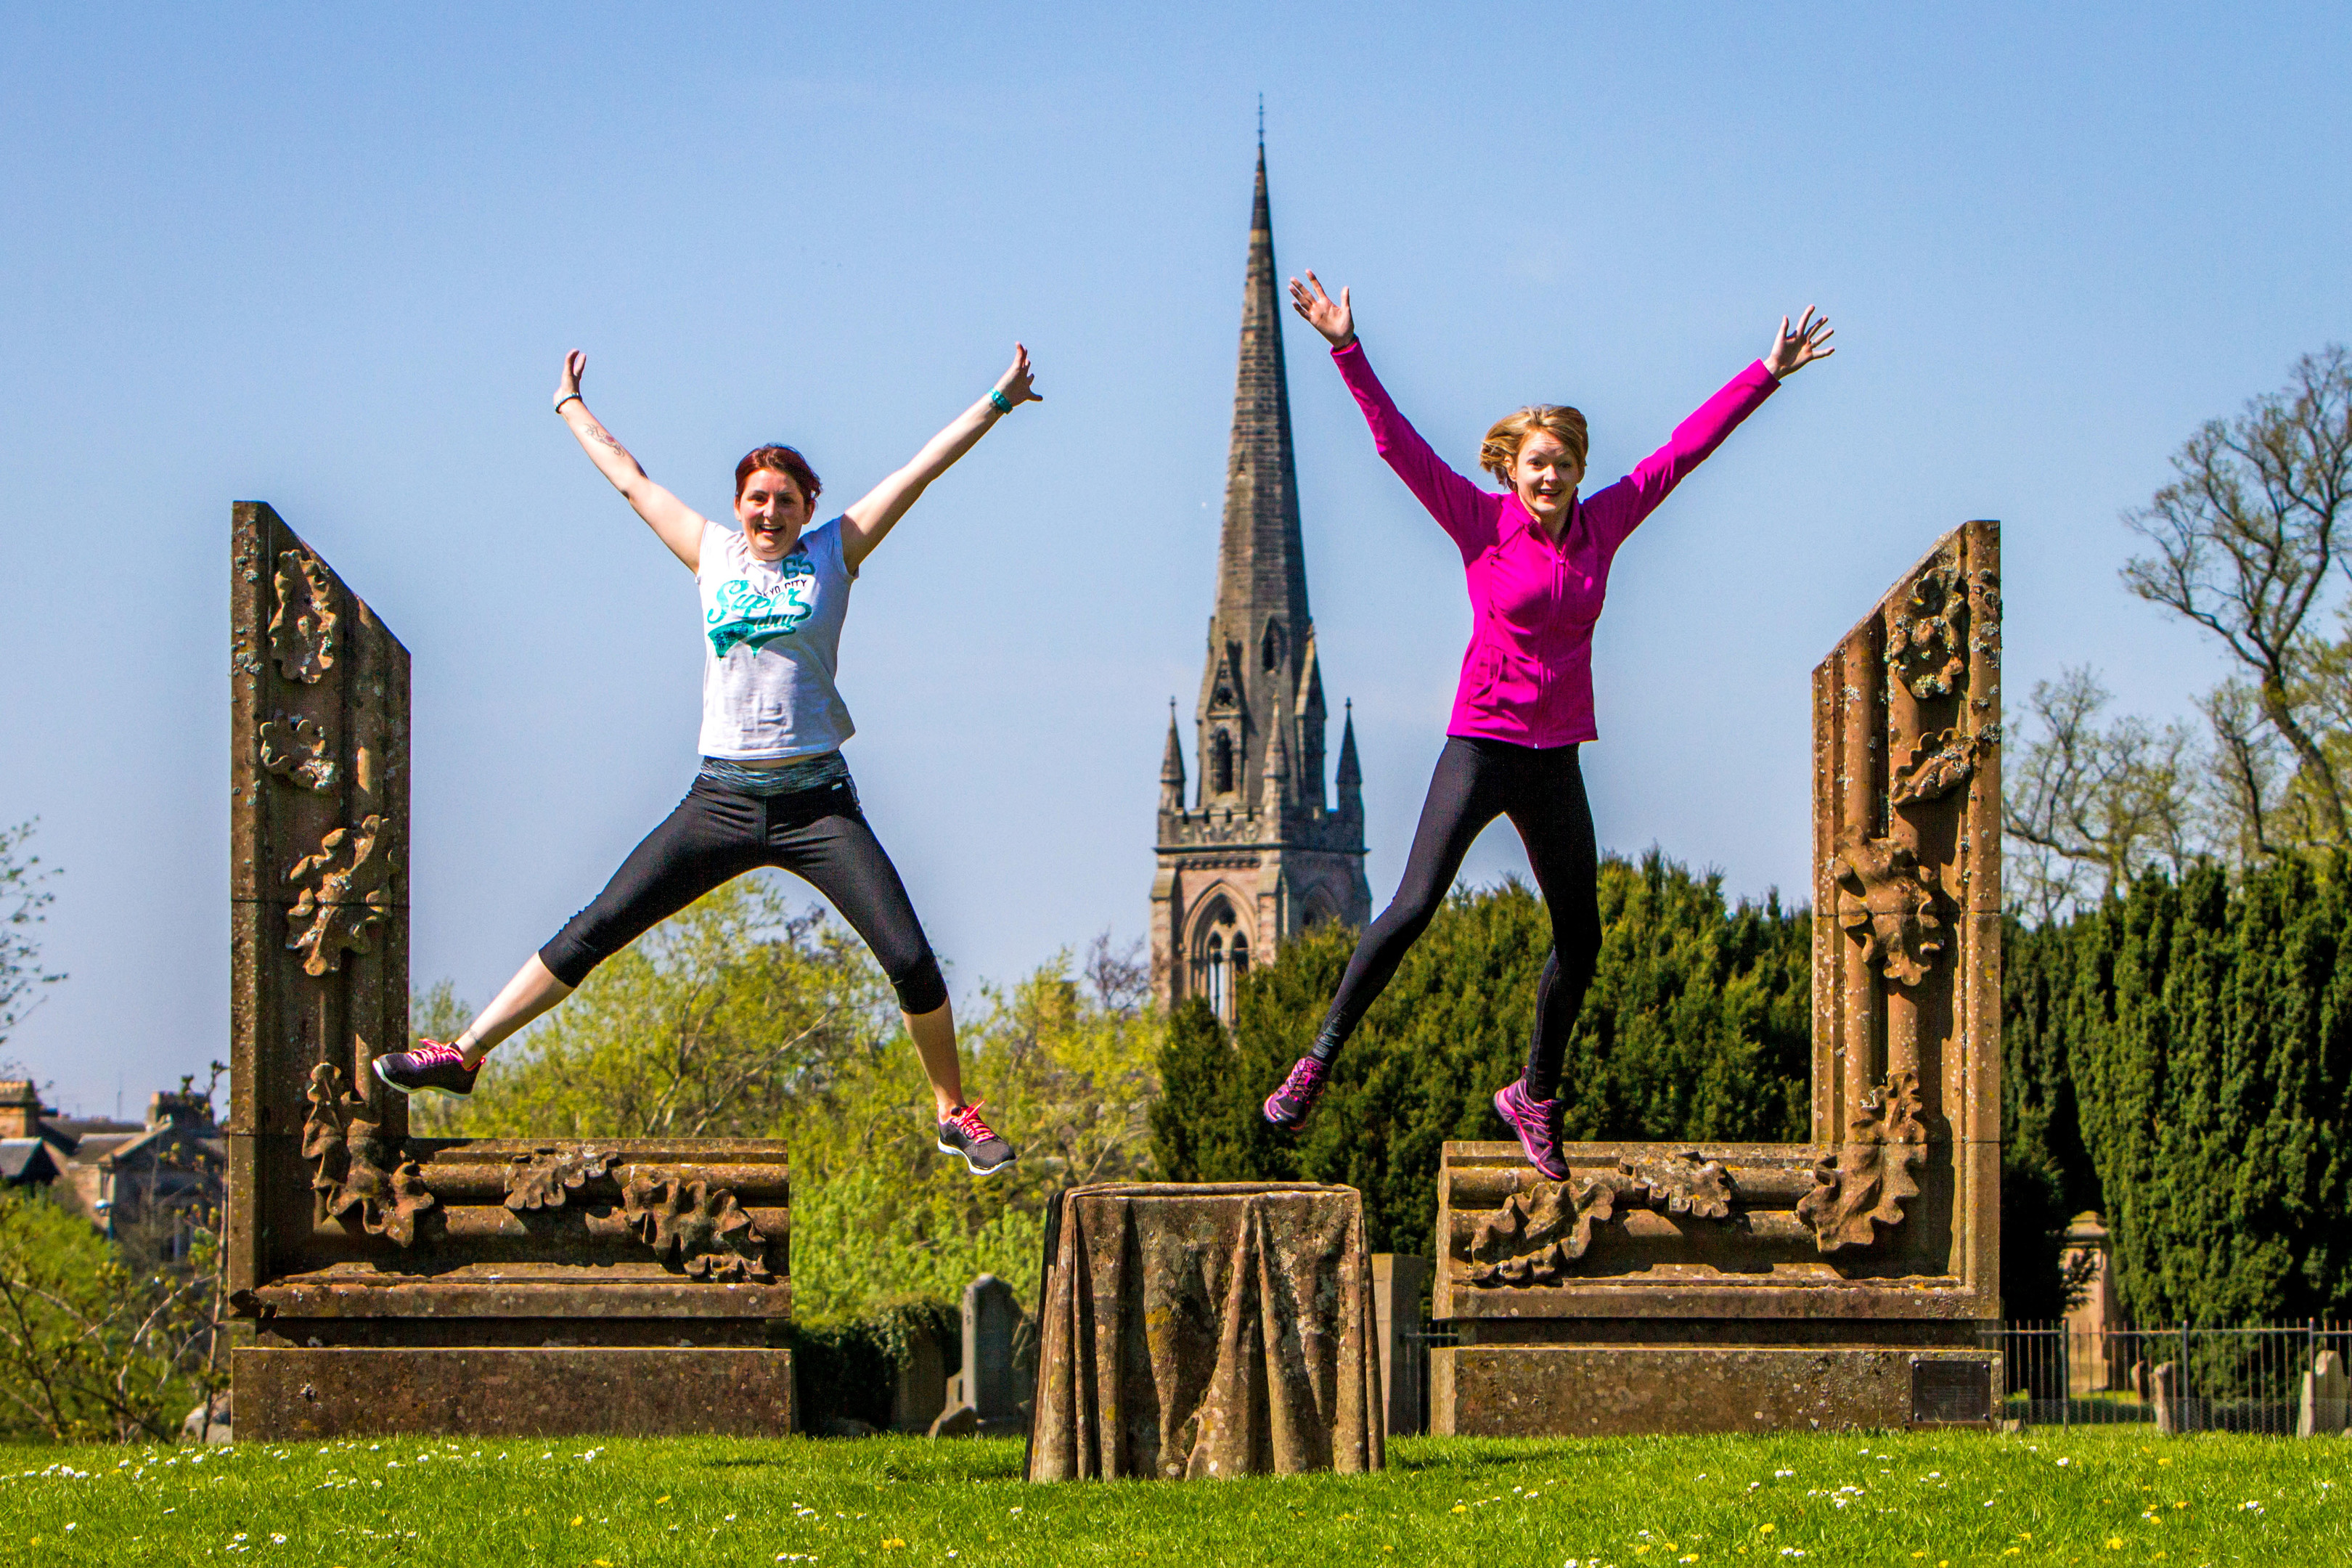 Jumping for joy in Perth are friends Stephane Reid (left) and Fiona Campbell (Steve MacDougall / DC Thomson)